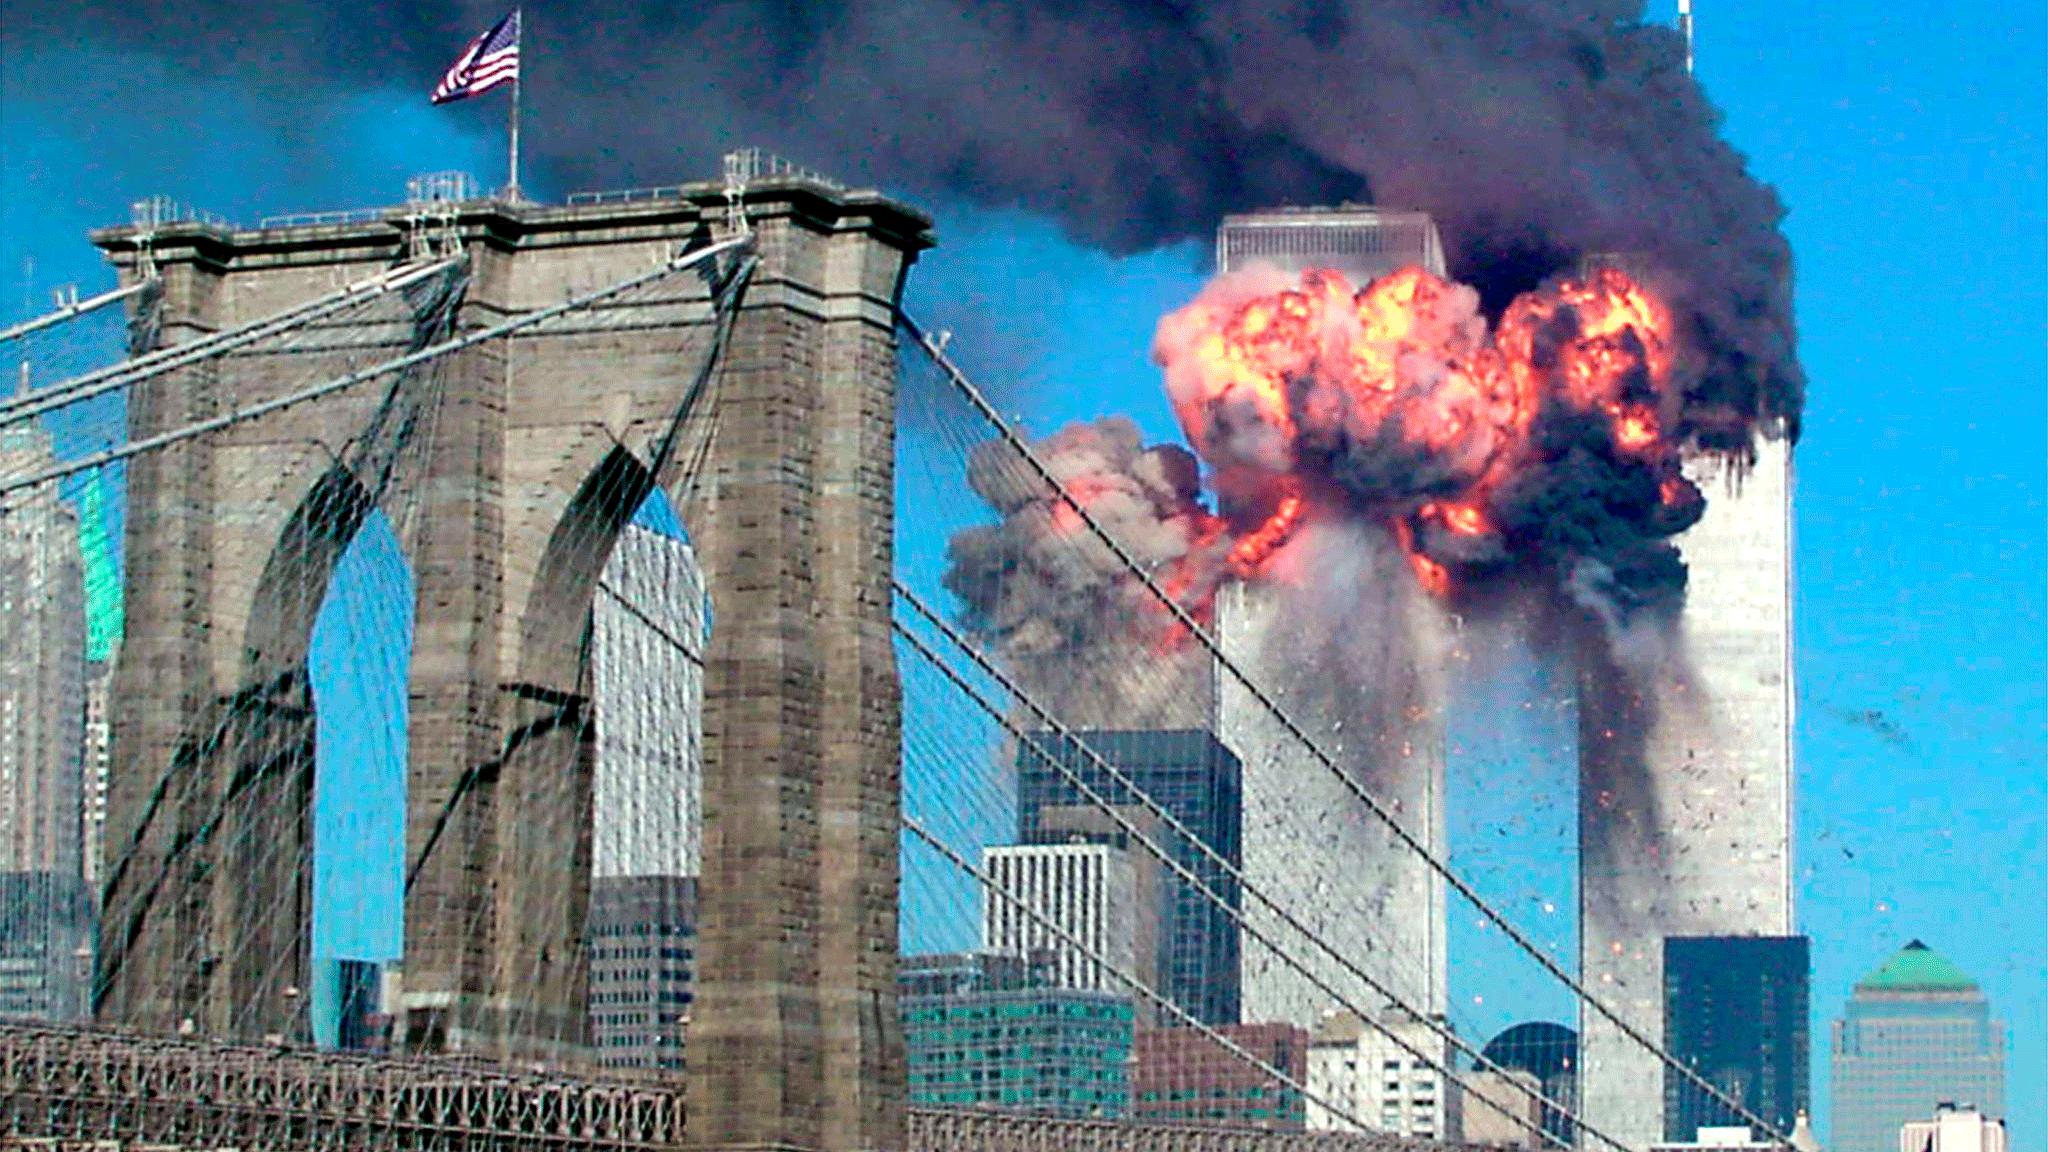 The second tower of the World Trade Center bursts into flames after being hit by a hijacked airplane in New York in this 9/11/01 file photograph. The Brooklyn bridge is seen in the foreground.